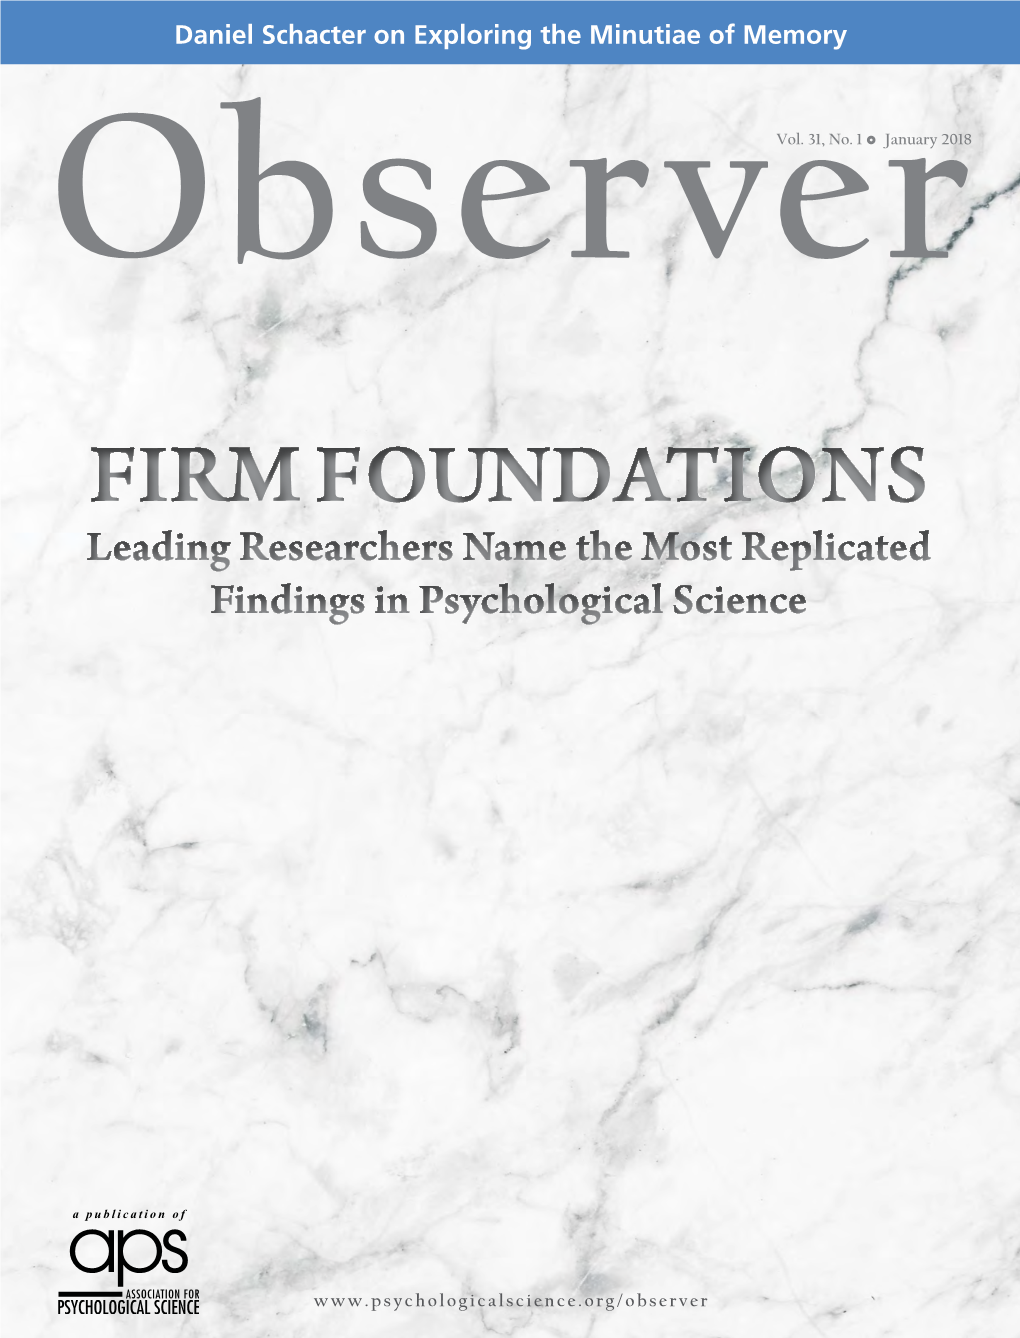 FIRM FOUNDATIONS Leading Researchers Name the Most Replicated Findings in Psychological Science